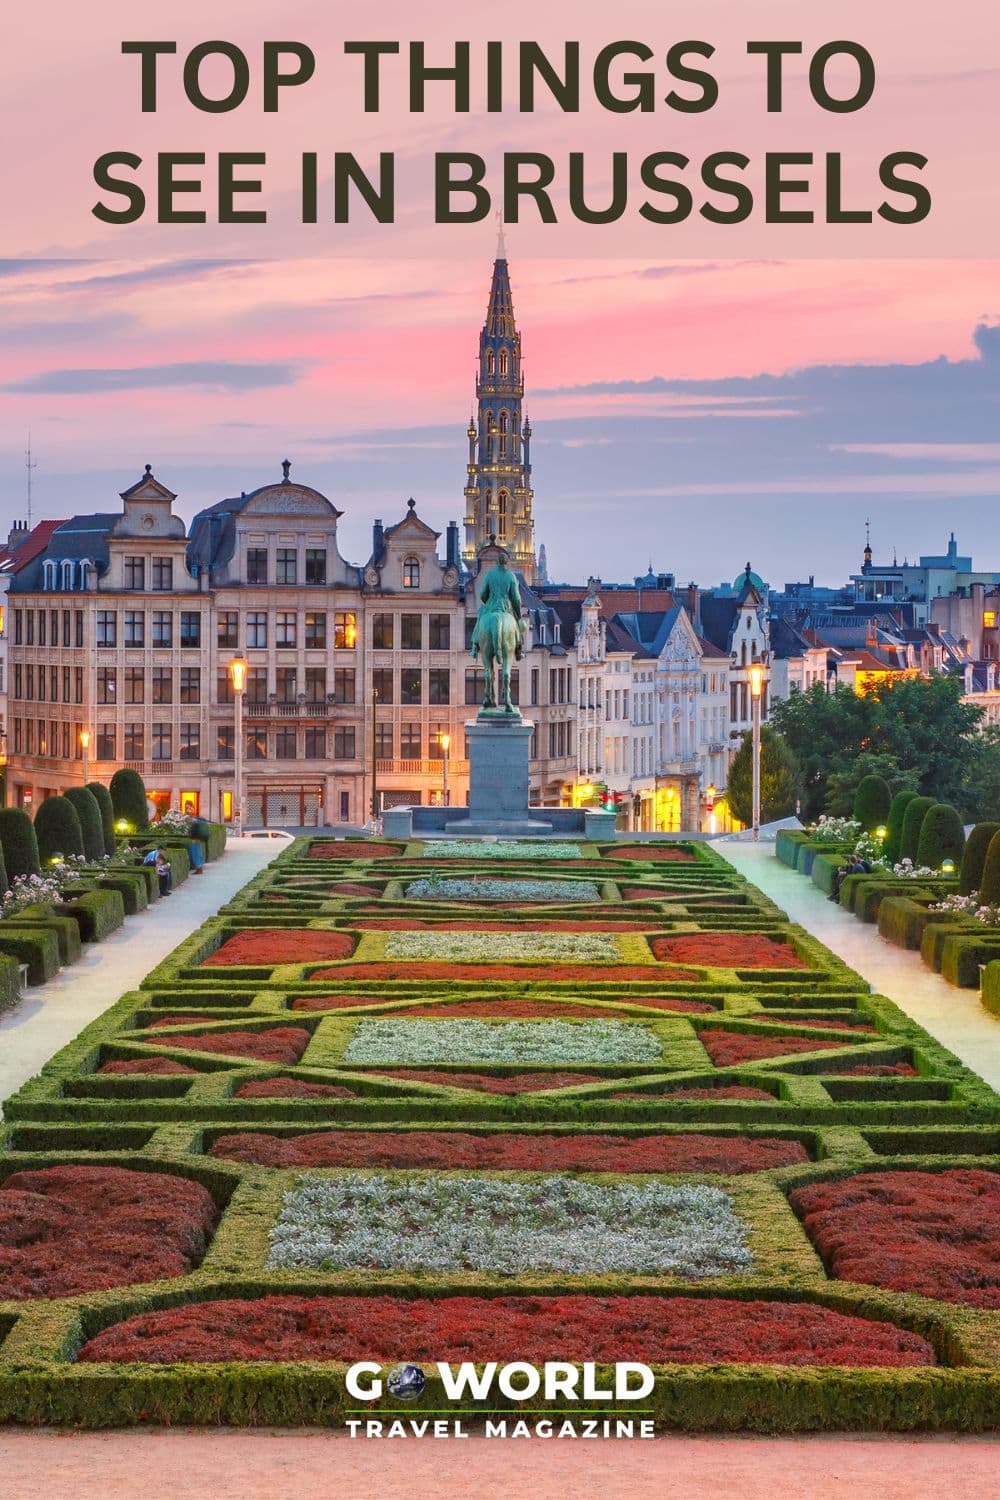 Brussels is the headquarters of Europe and is known for its beer, chocolate and amazing architecture. Here are 5 things to see in Brussels.  #Brussels #Things to do in brussels